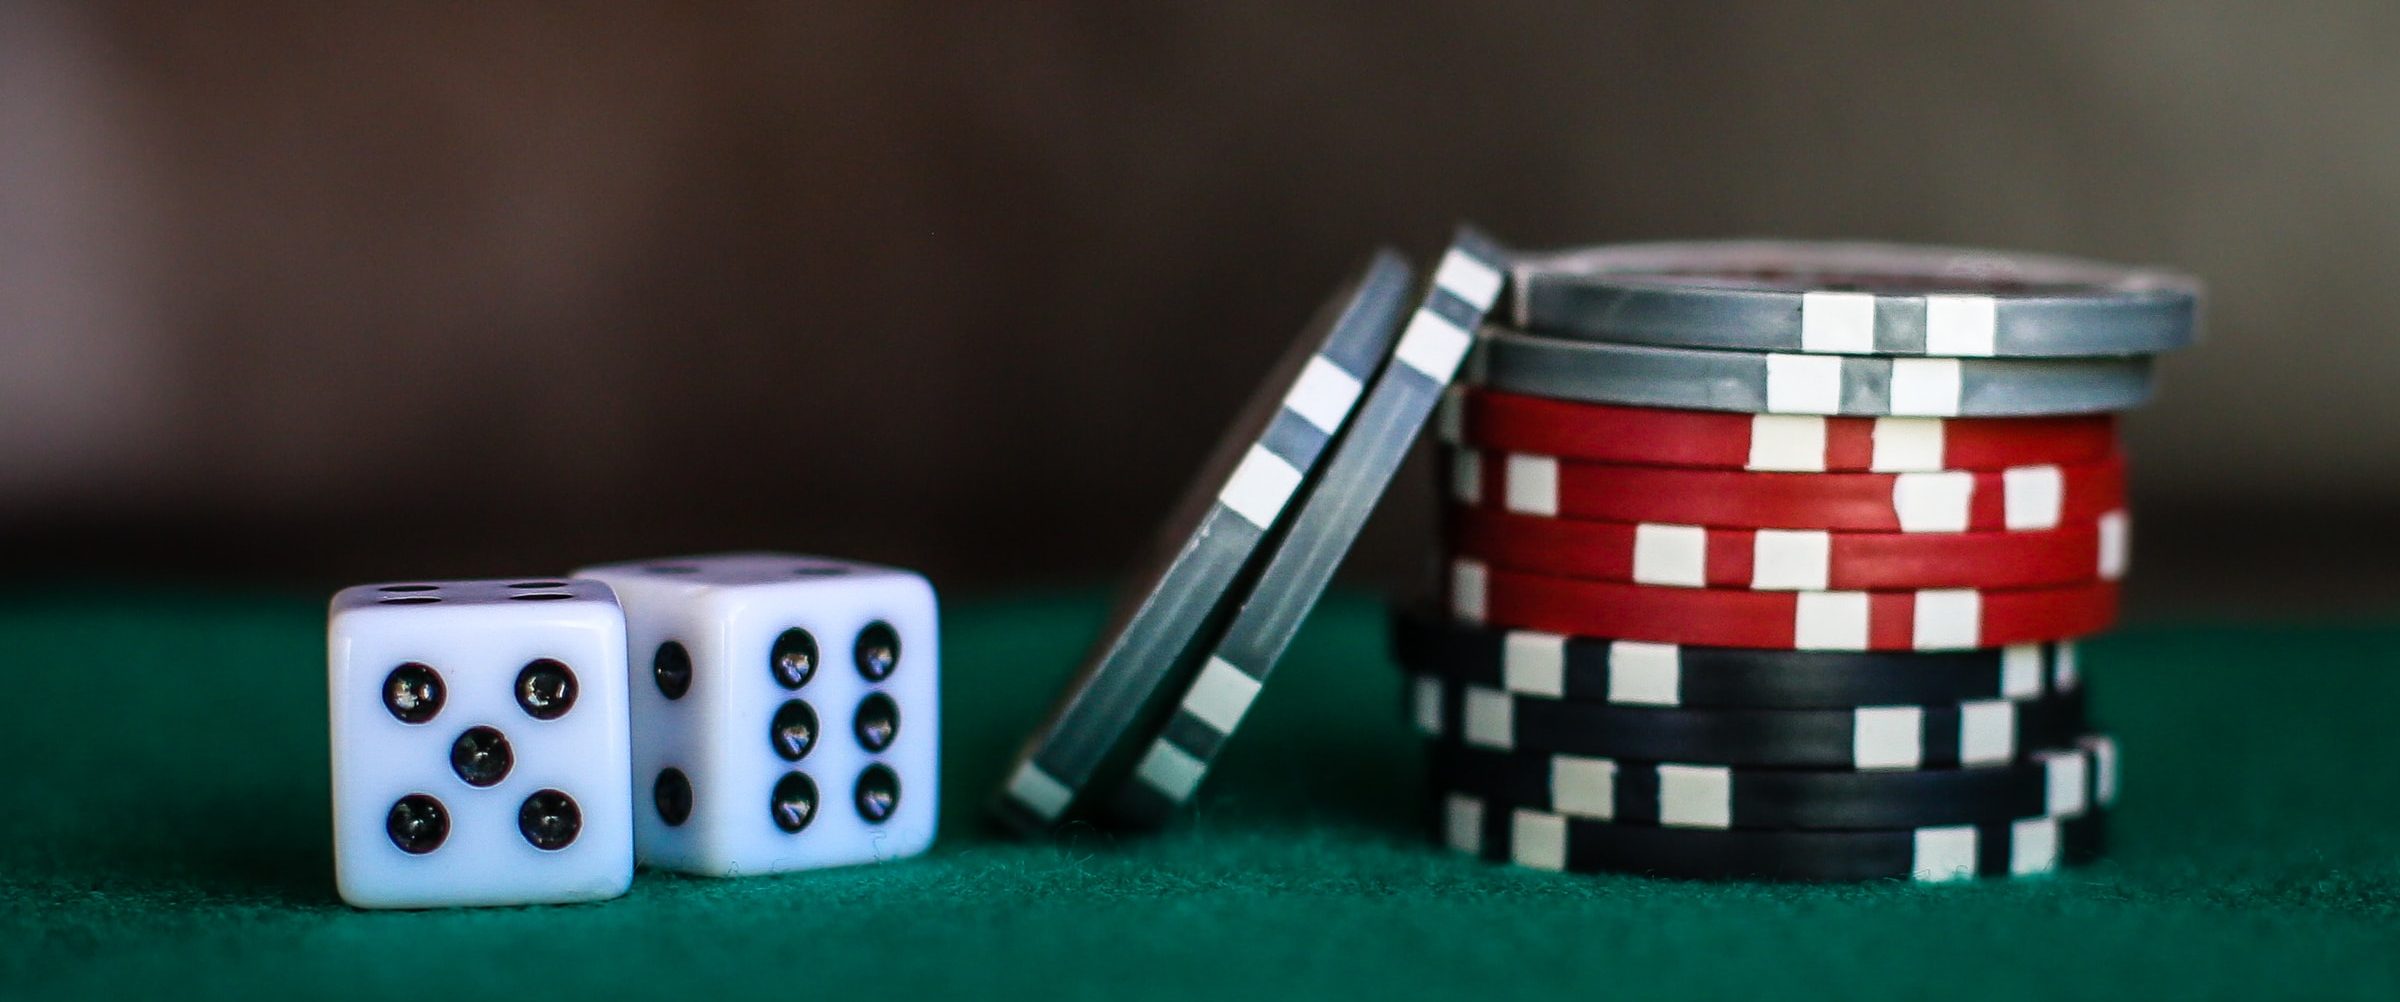 Men's Health Week: Stacking the odds against gambling harms - the case for  stronger regulation - Institute of Public Health